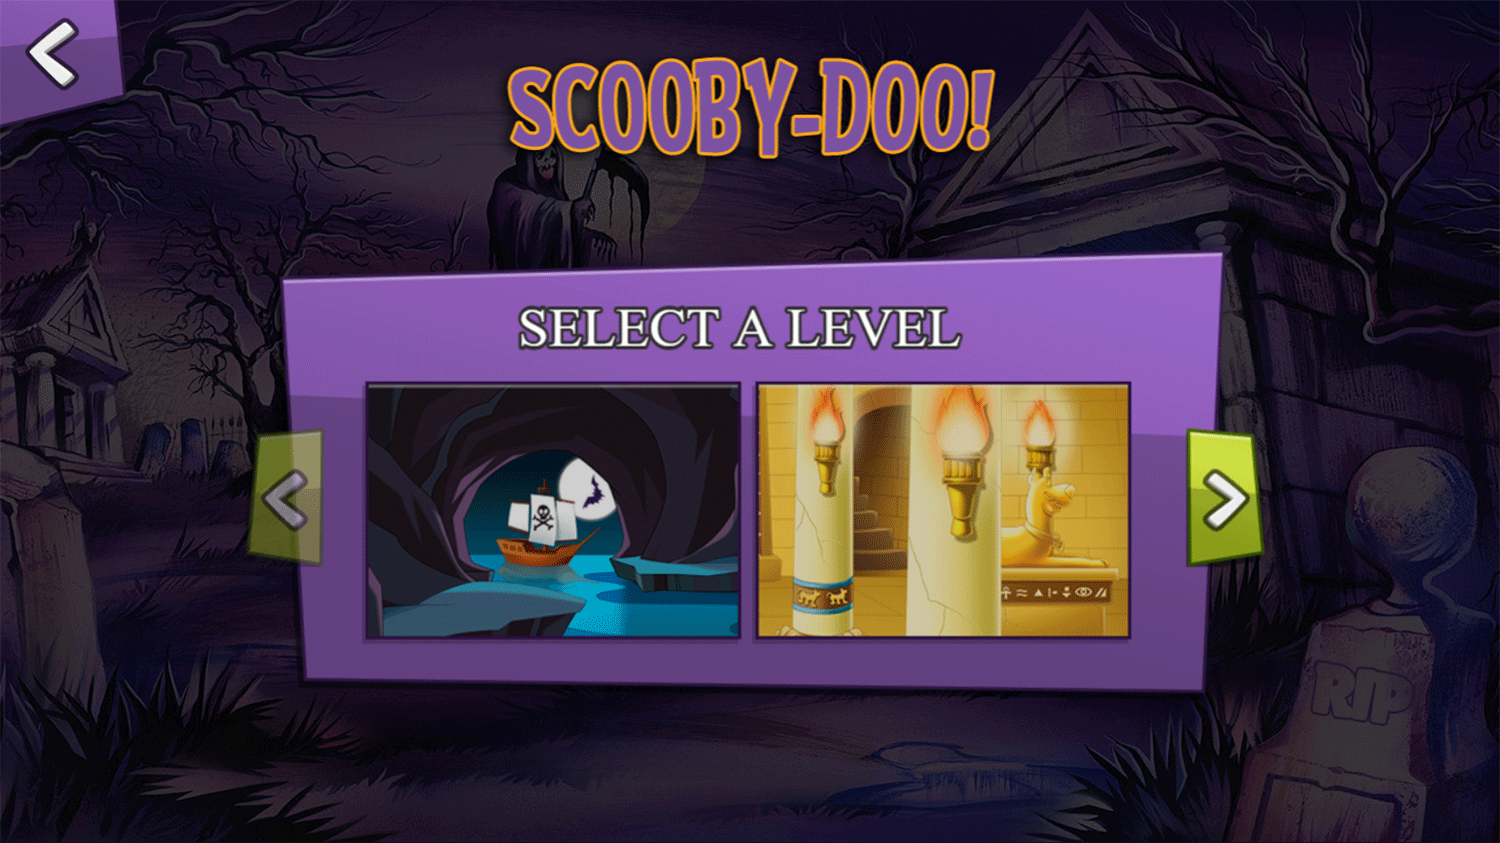 Scooby Doo Search N Scare Select Level Screenshot.